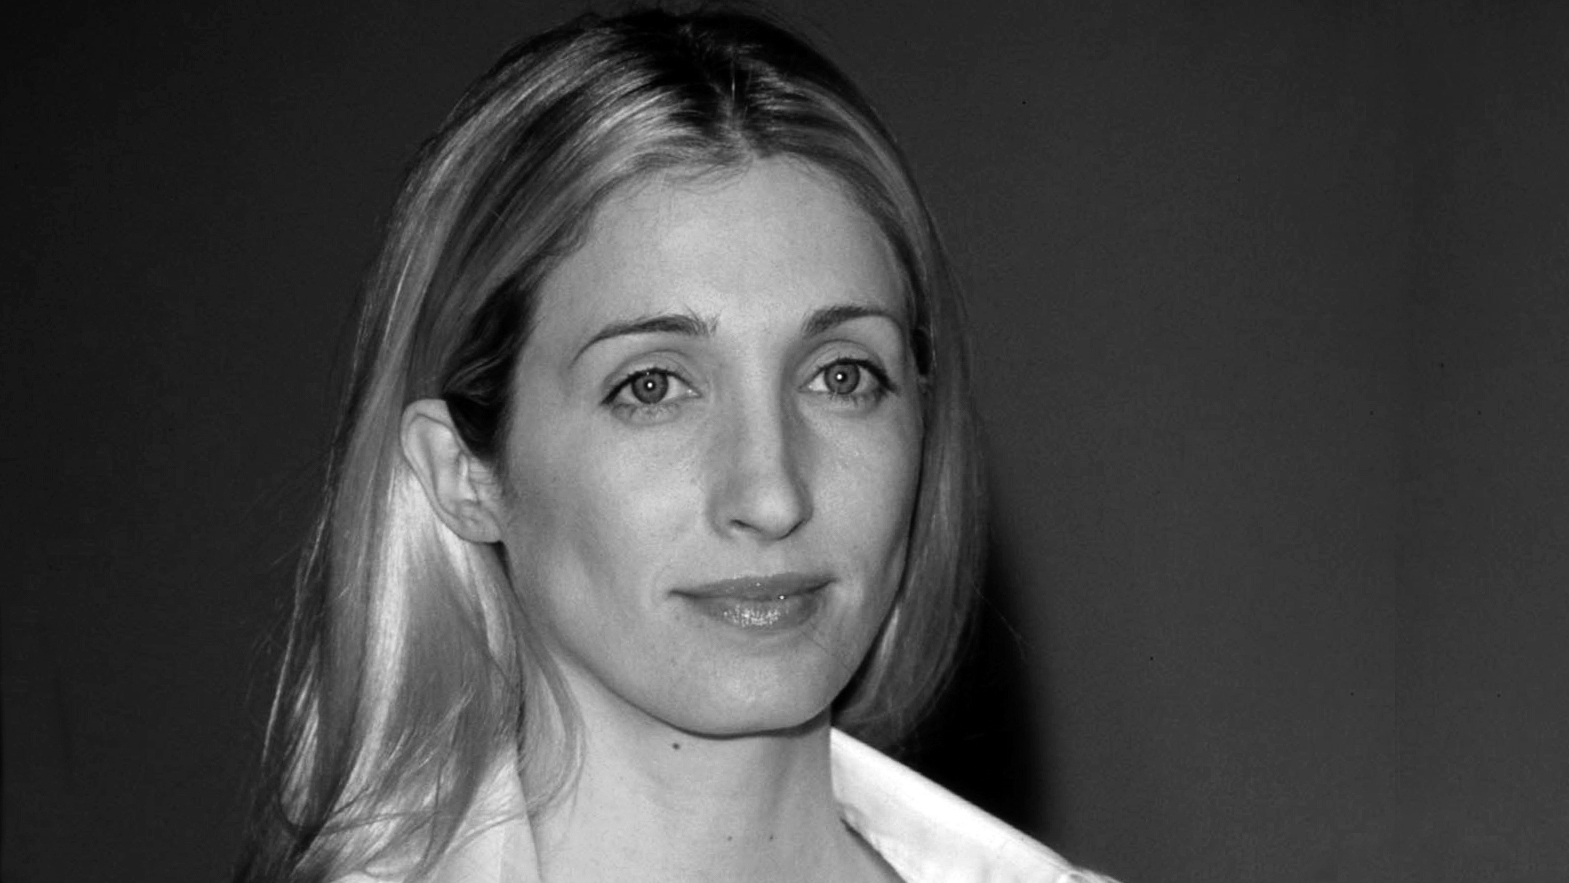 Why Carolyn Bessette Kennedy remains a modern style icon